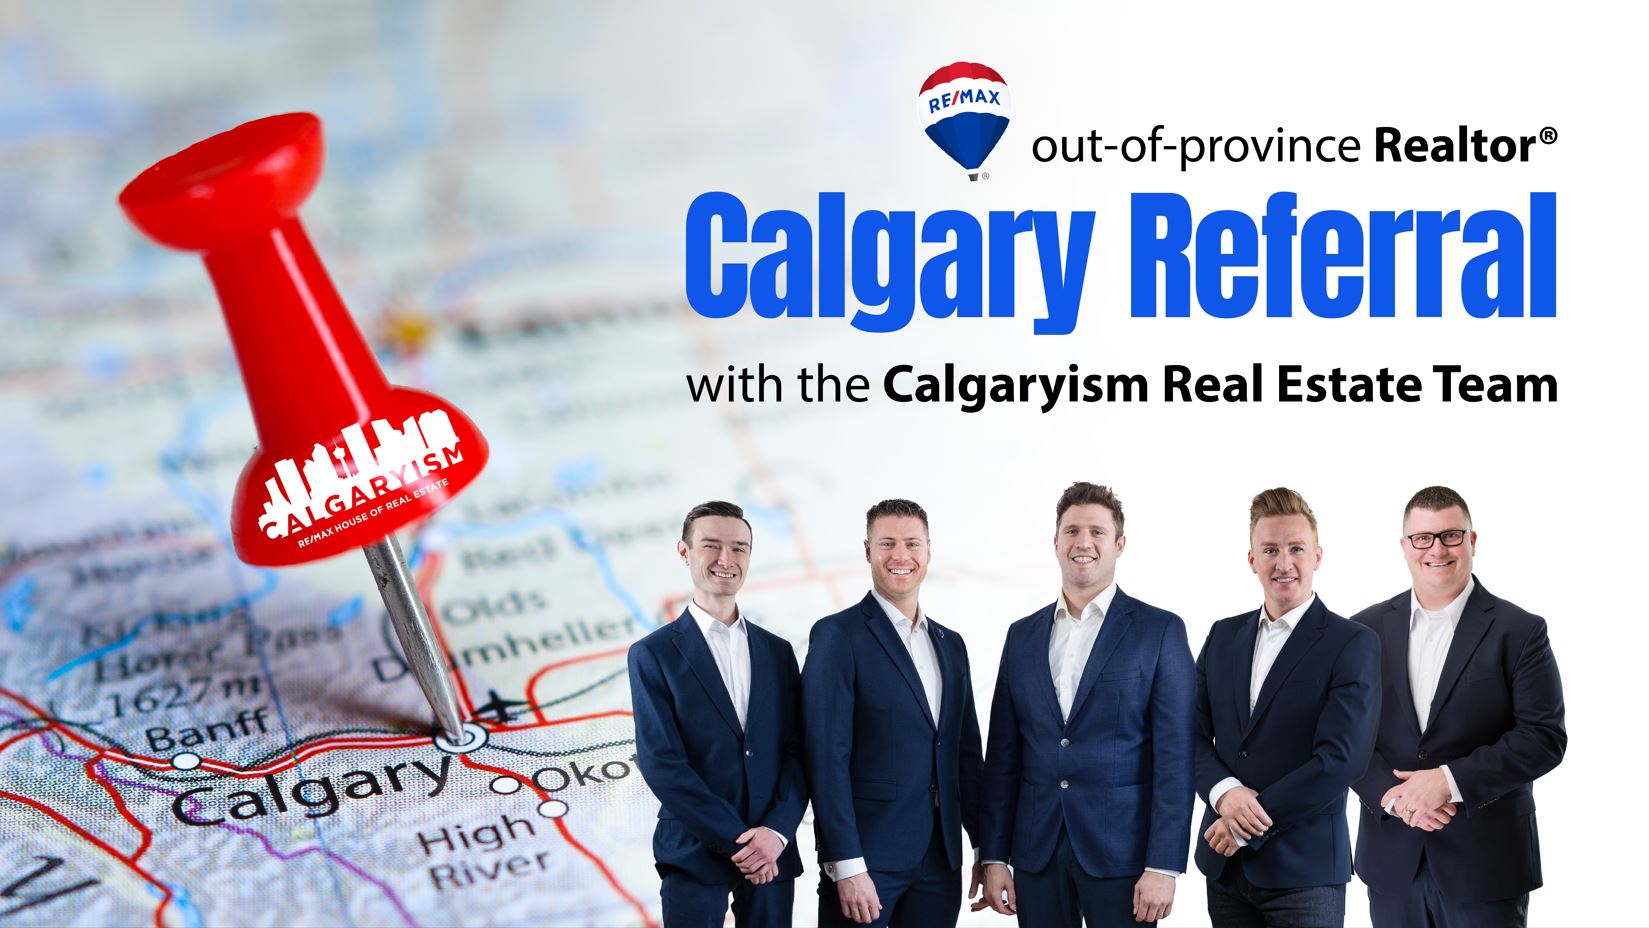 do I need a license to practice real estate in Alberta cover